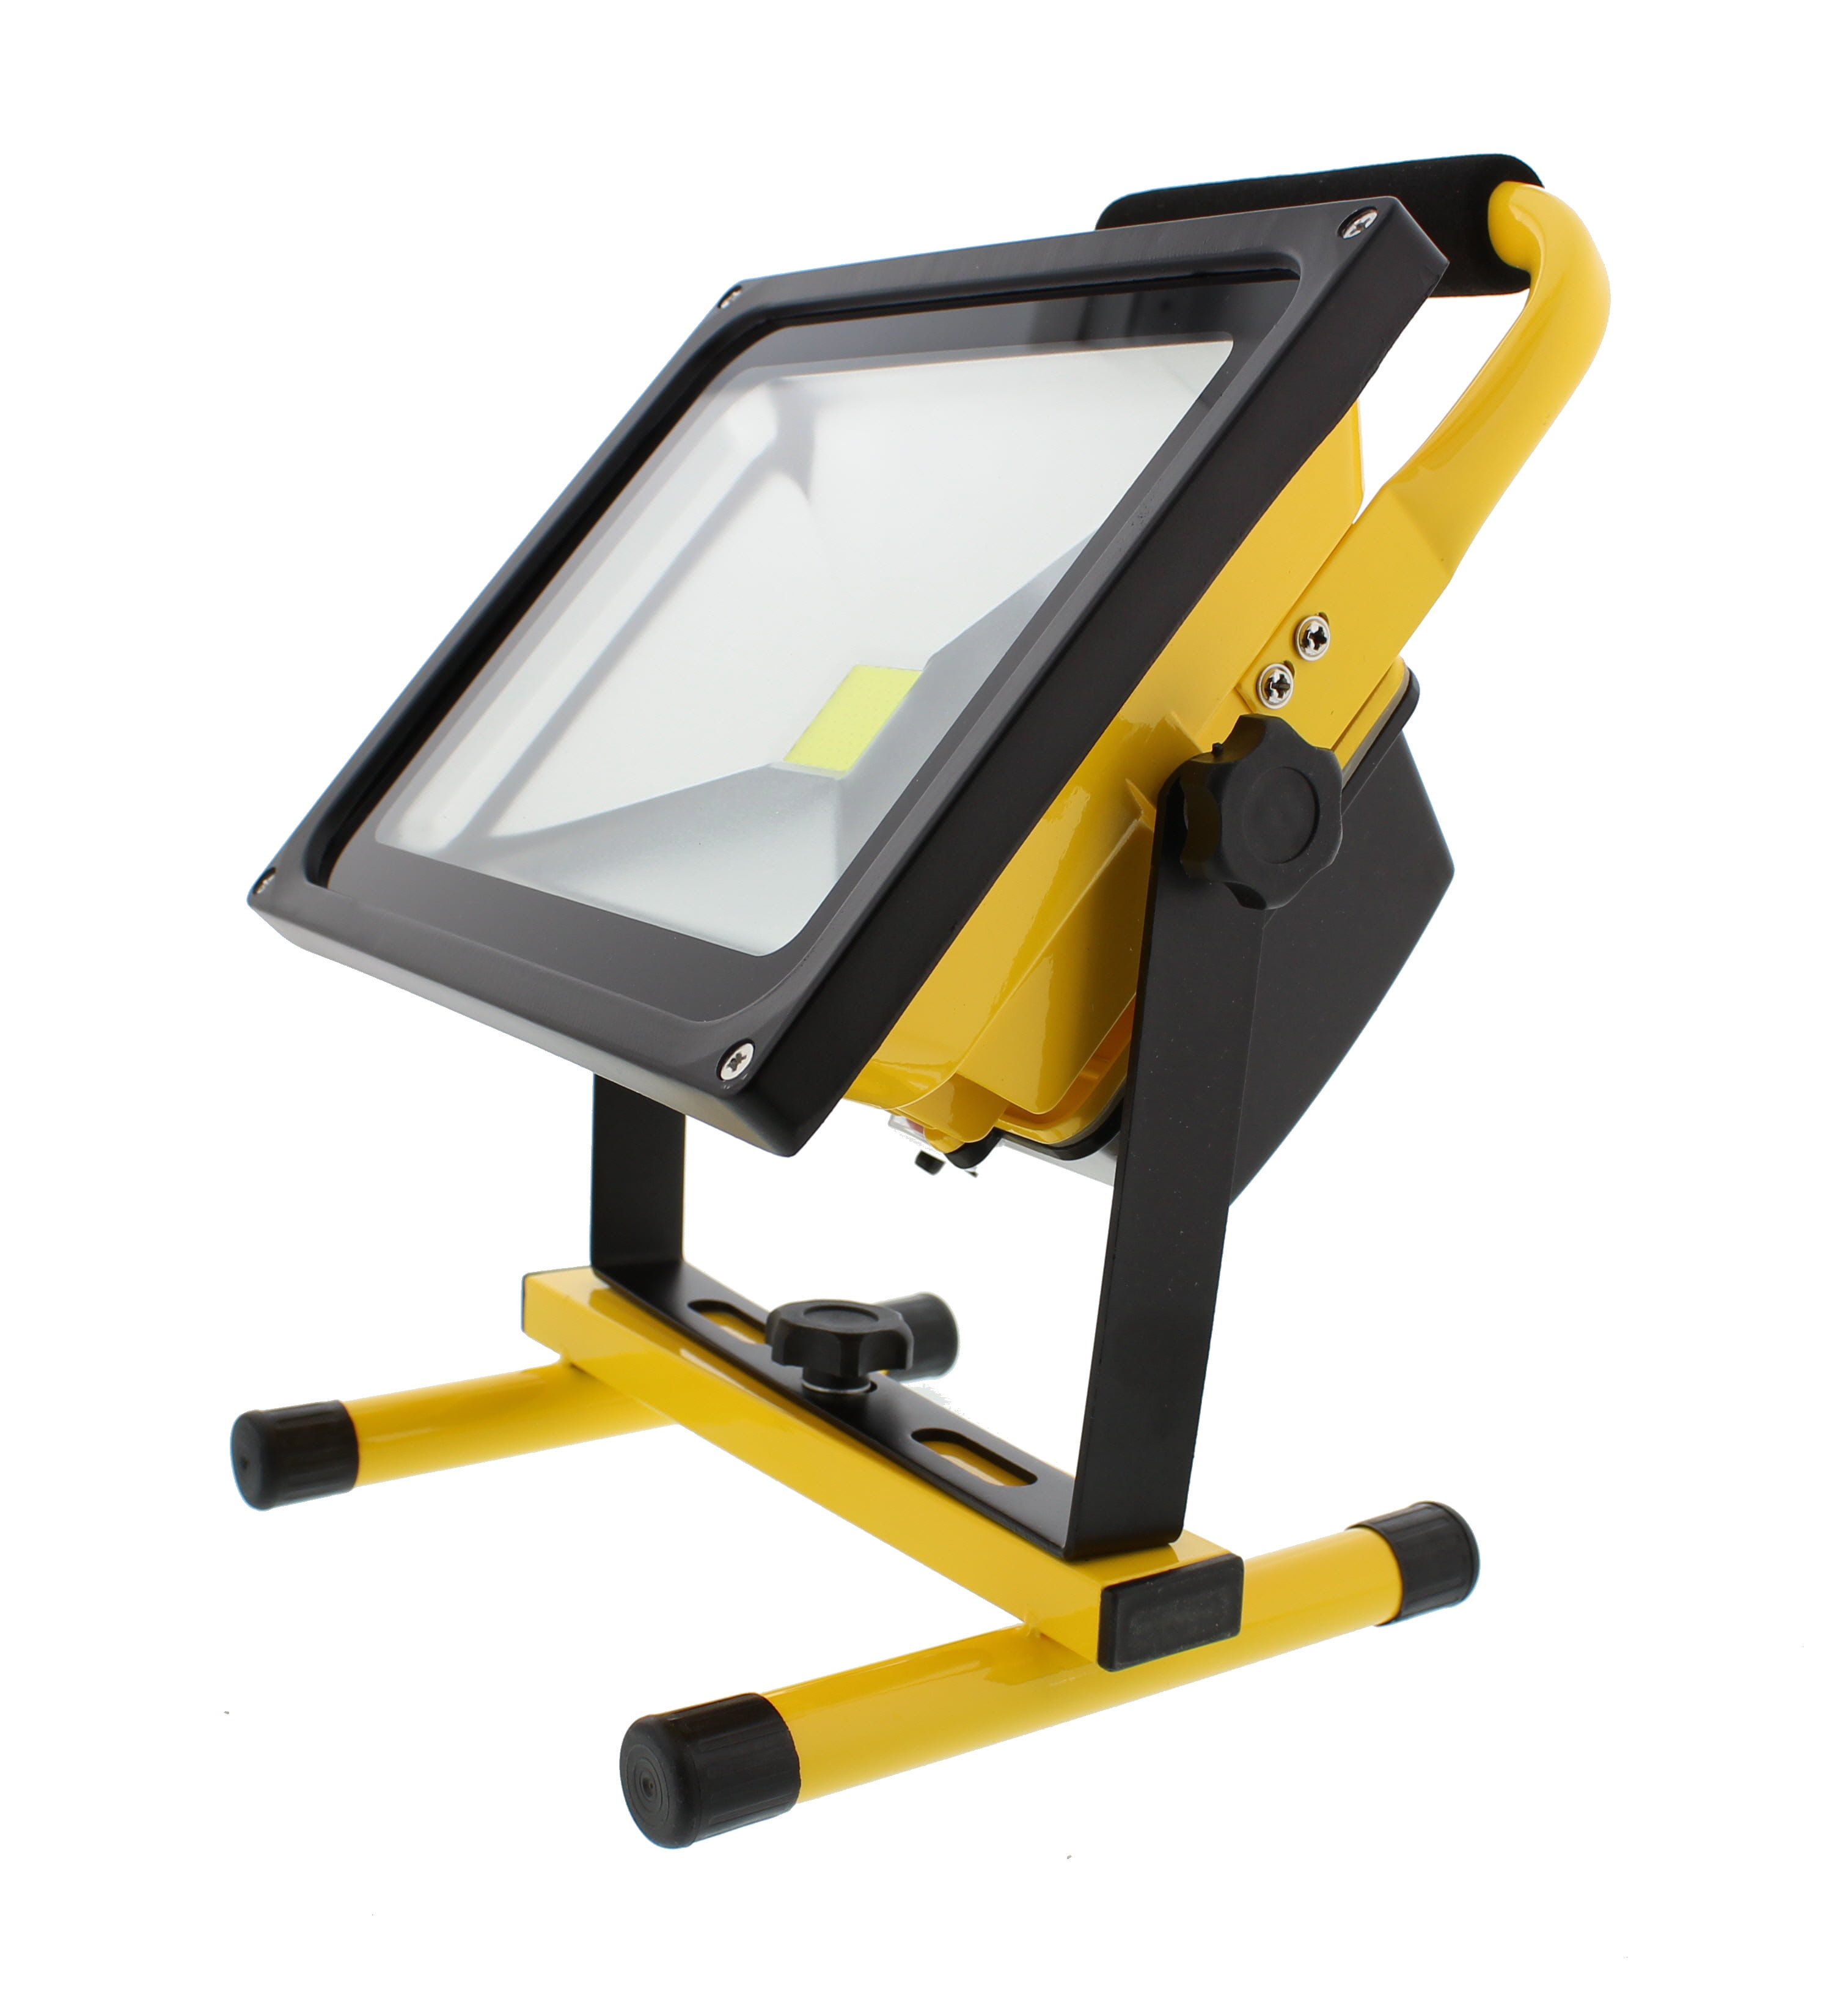 Details about  / 30W Rechargeable Portable Cordless Car Camping LED Work Light Flood Lights IP65